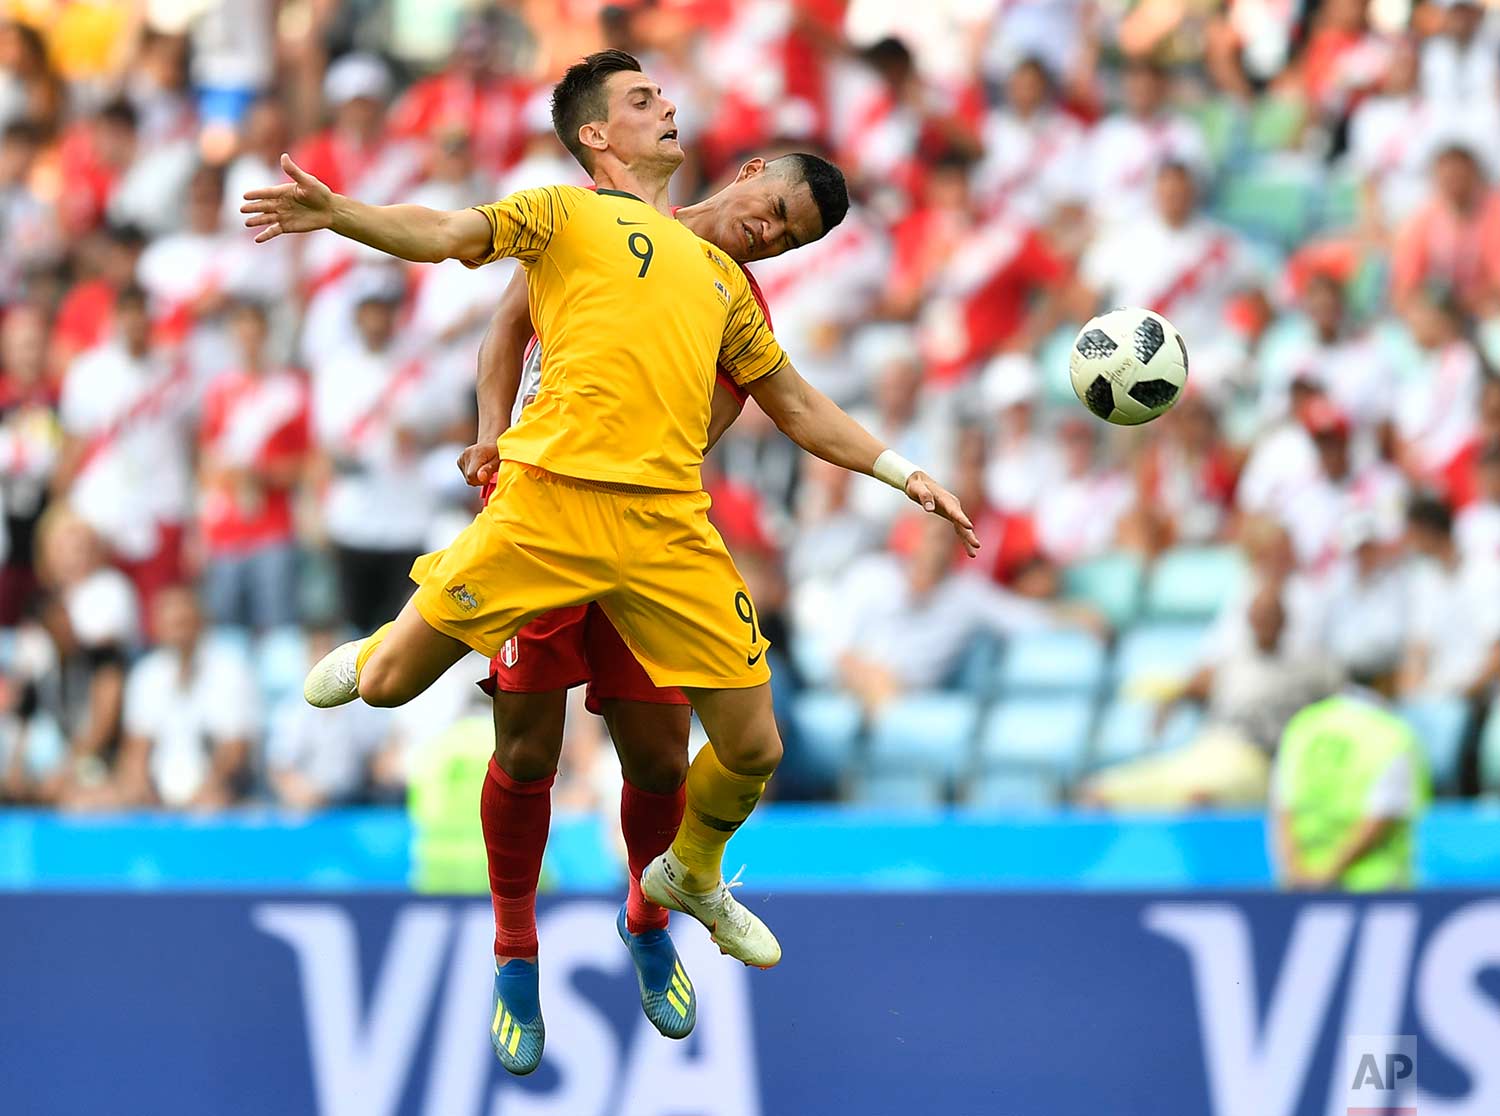  Peru's Anderson Santamaria, background, and Australia's Tomi Juric go for a header during the group C match between Australia and Peru, at the 2018 soccer World Cup in the Fisht Stadium in Sochi, Russia, Tuesday, June 26, 2018. (AP Photo/Martin Meis